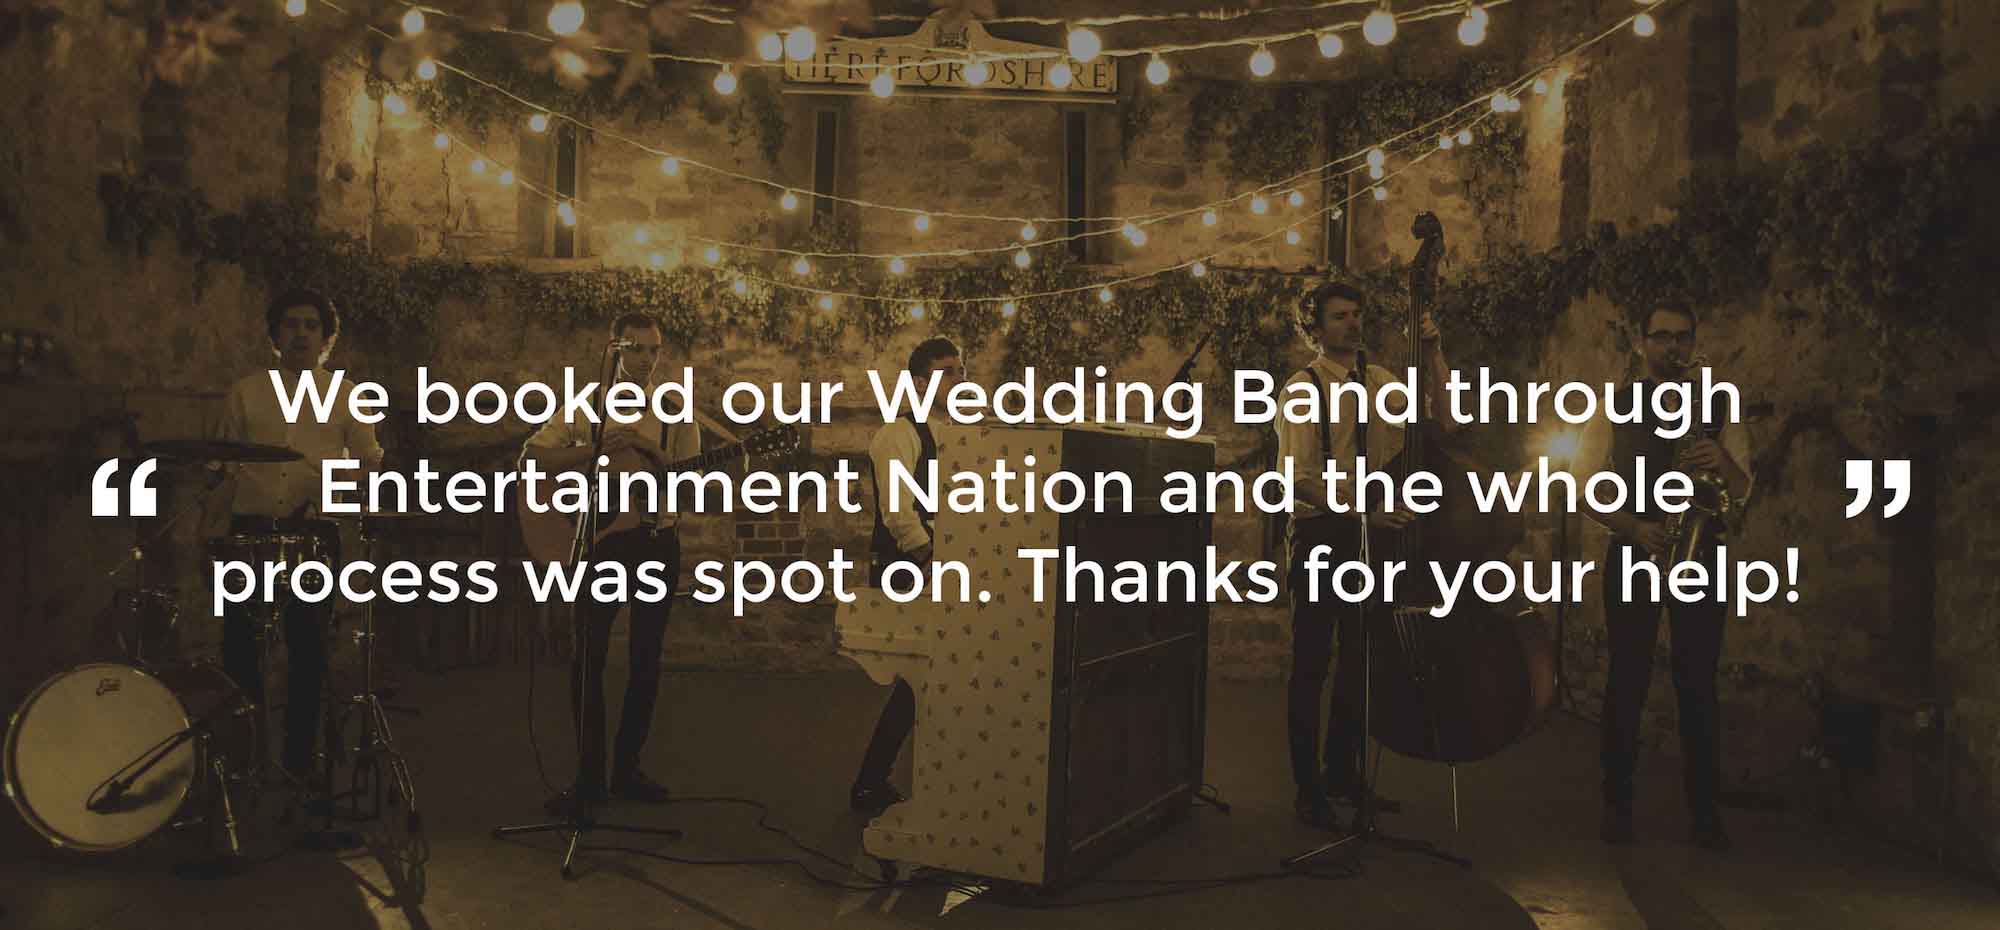 Client Review of a Wedding Band South Humberside